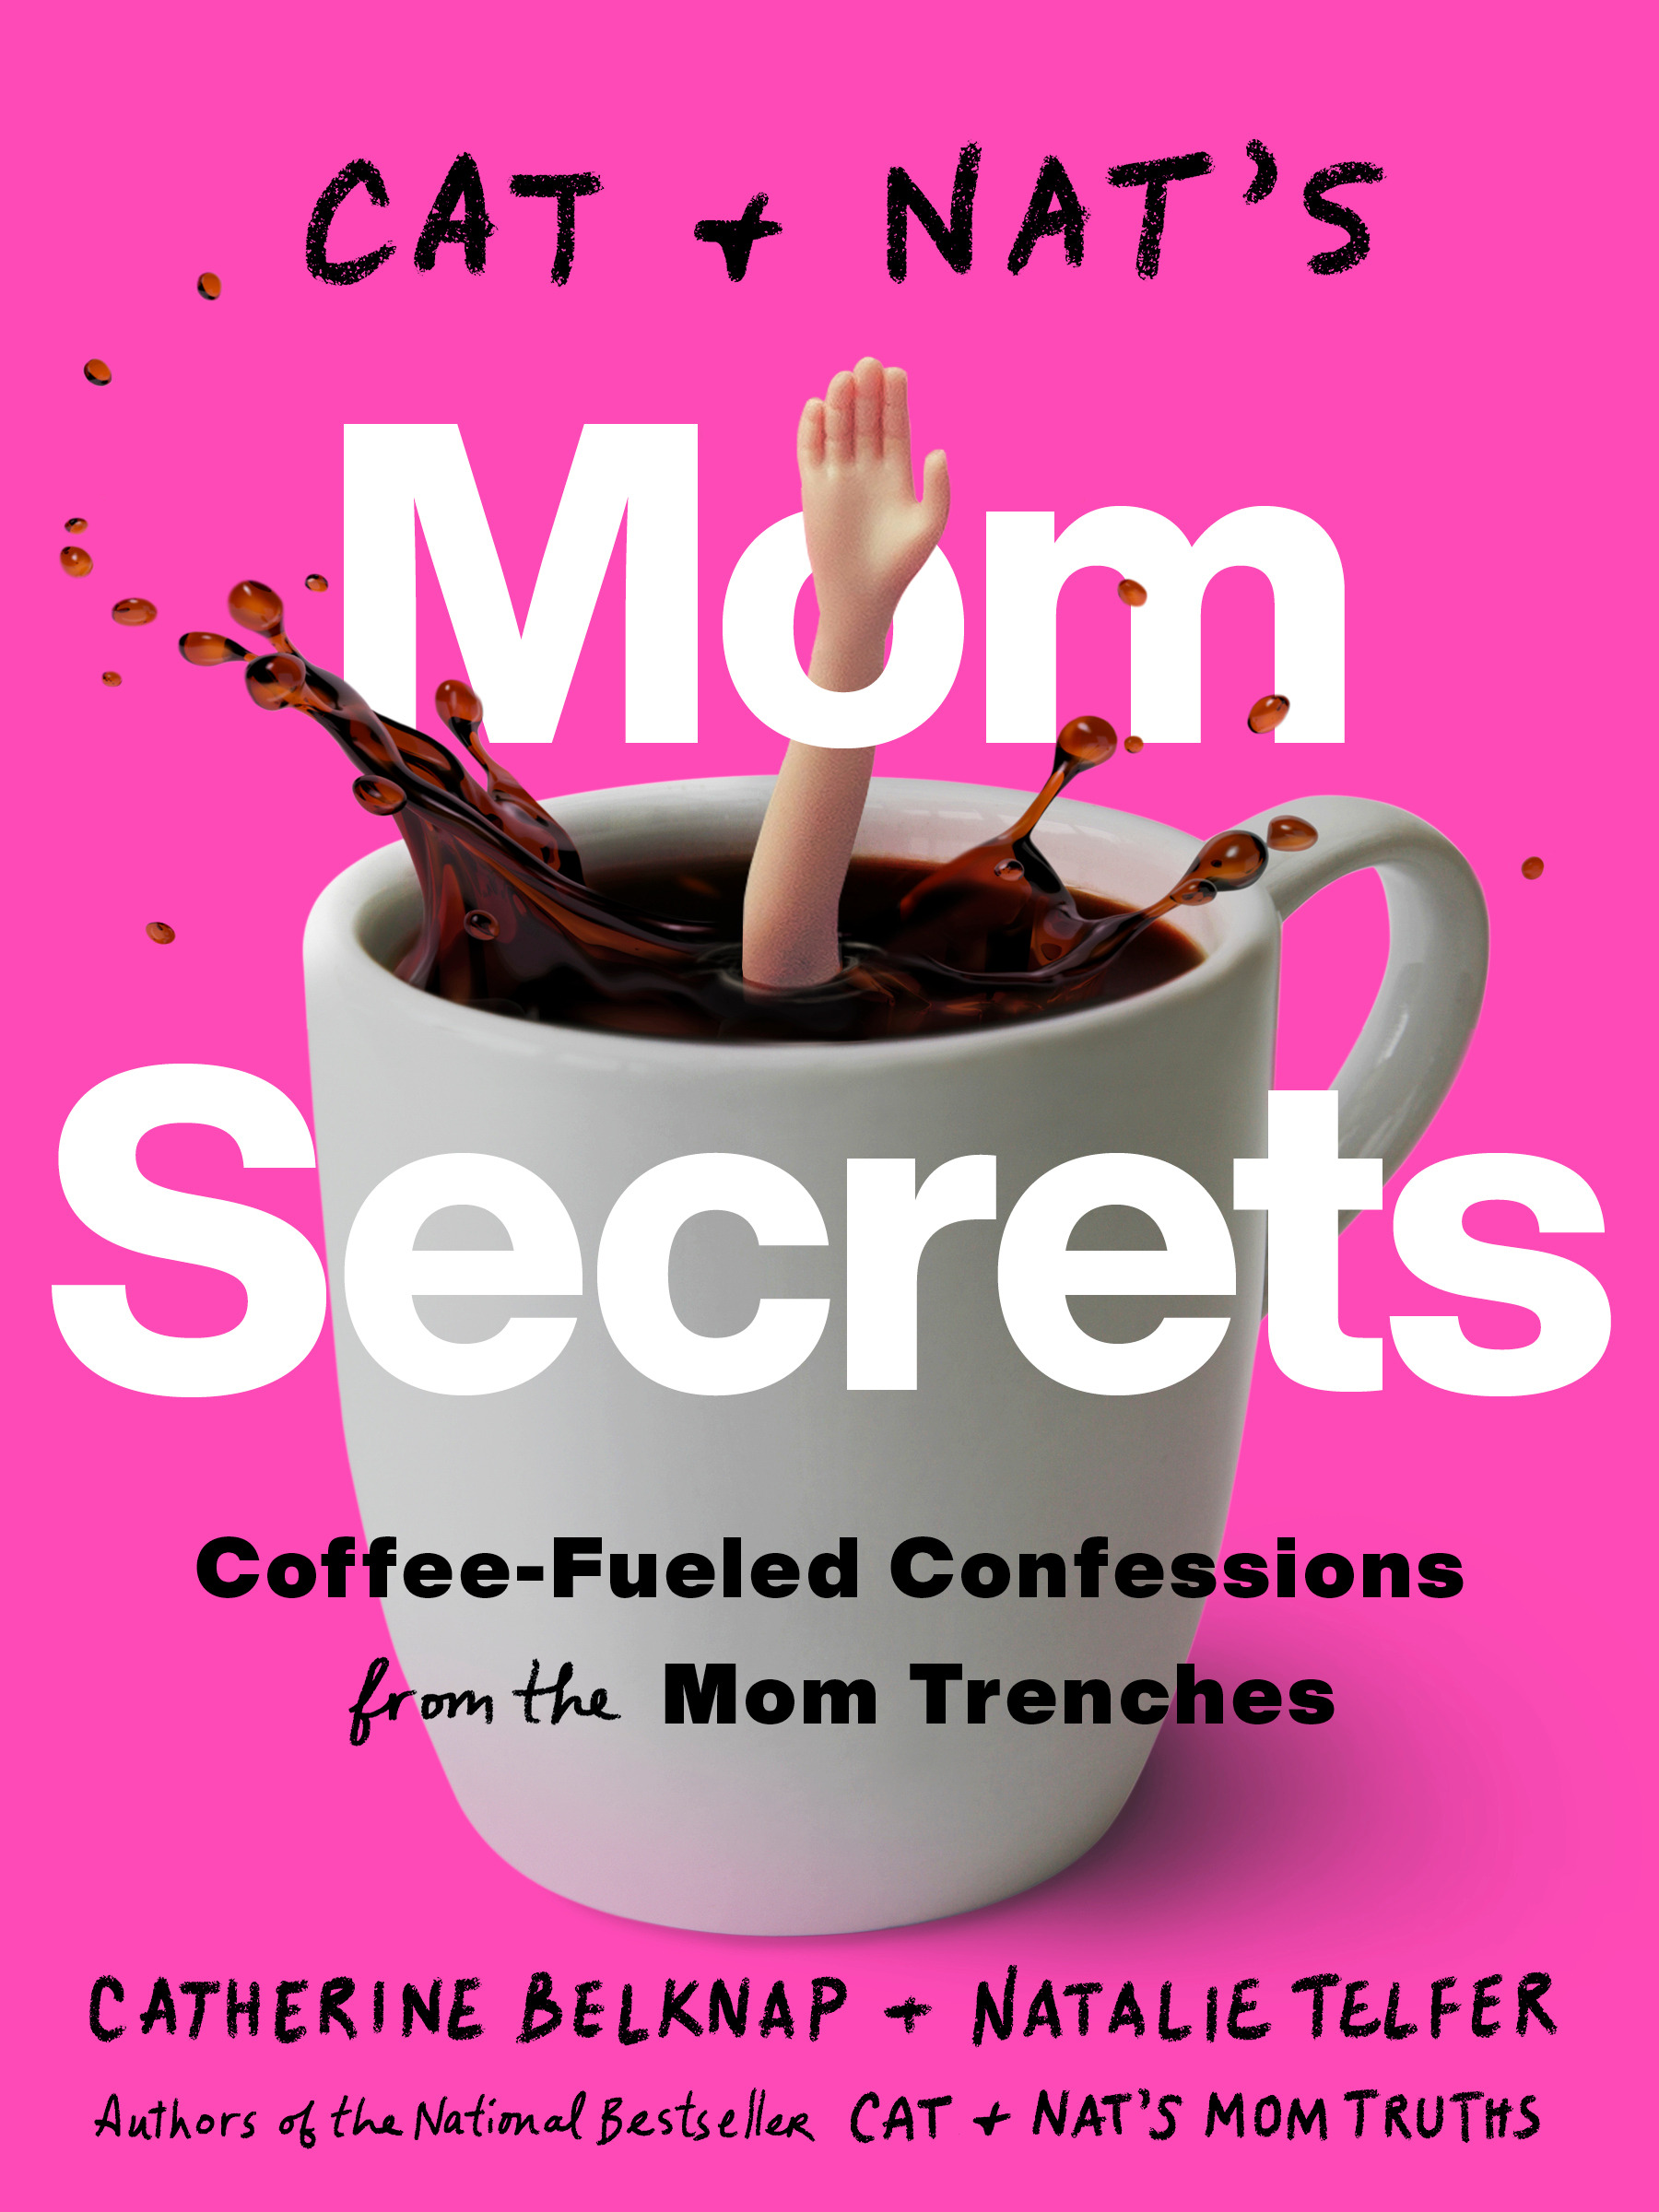 Cat and Nat's Mom Secrets : Coffee-Fueled Confessions from the Mom Trenches | Parenting